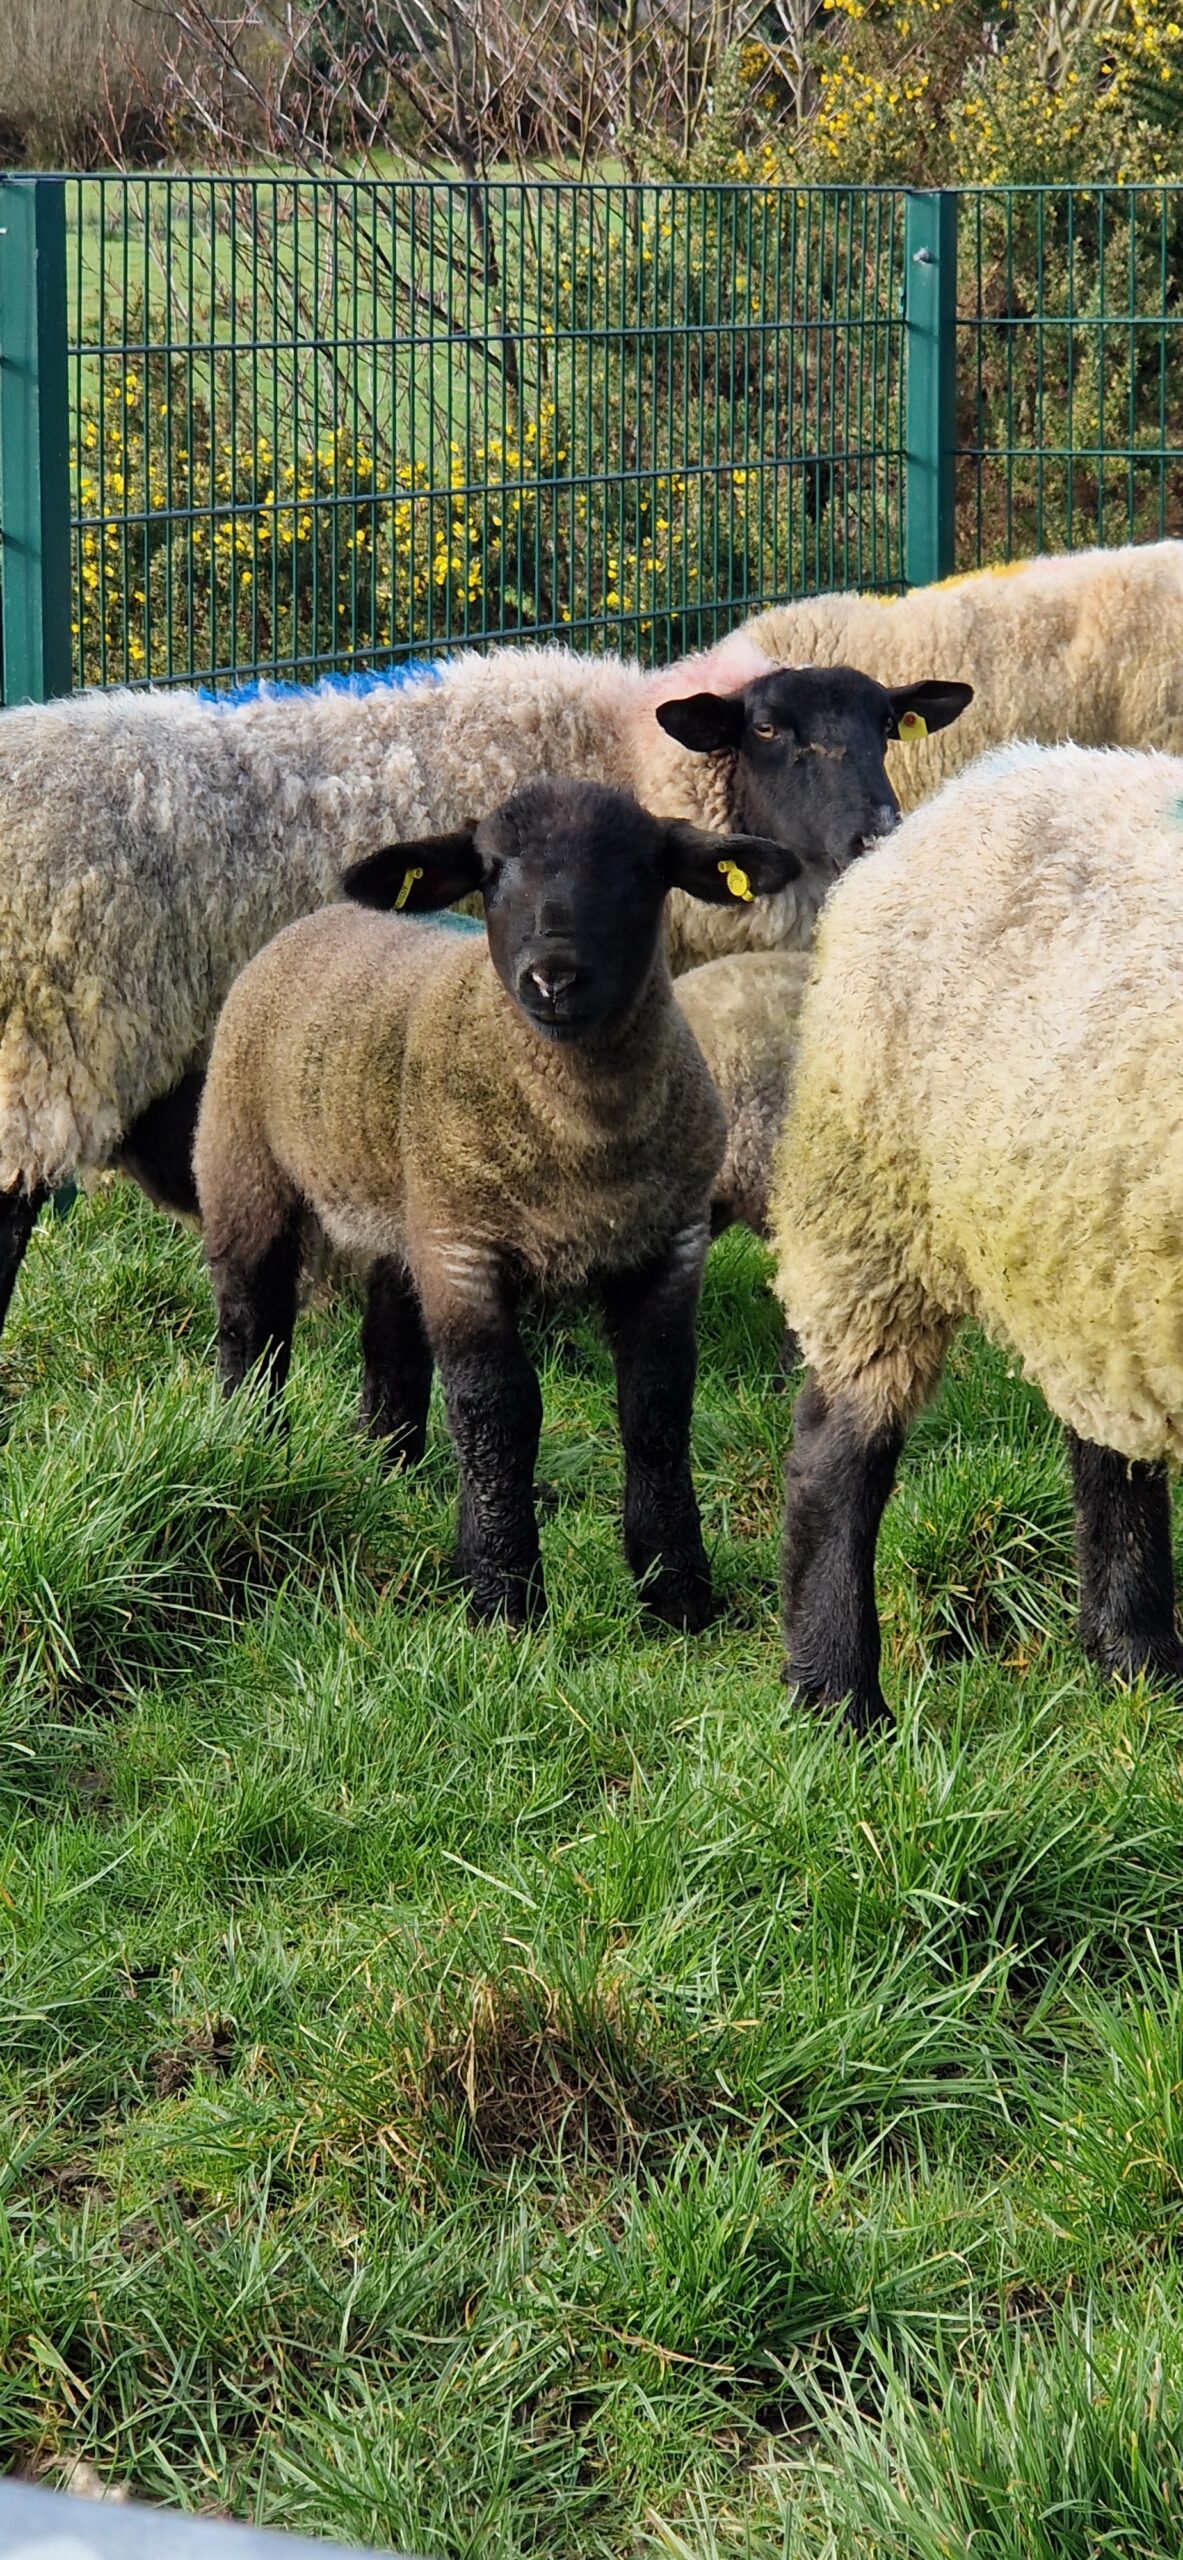 ewes and lambs